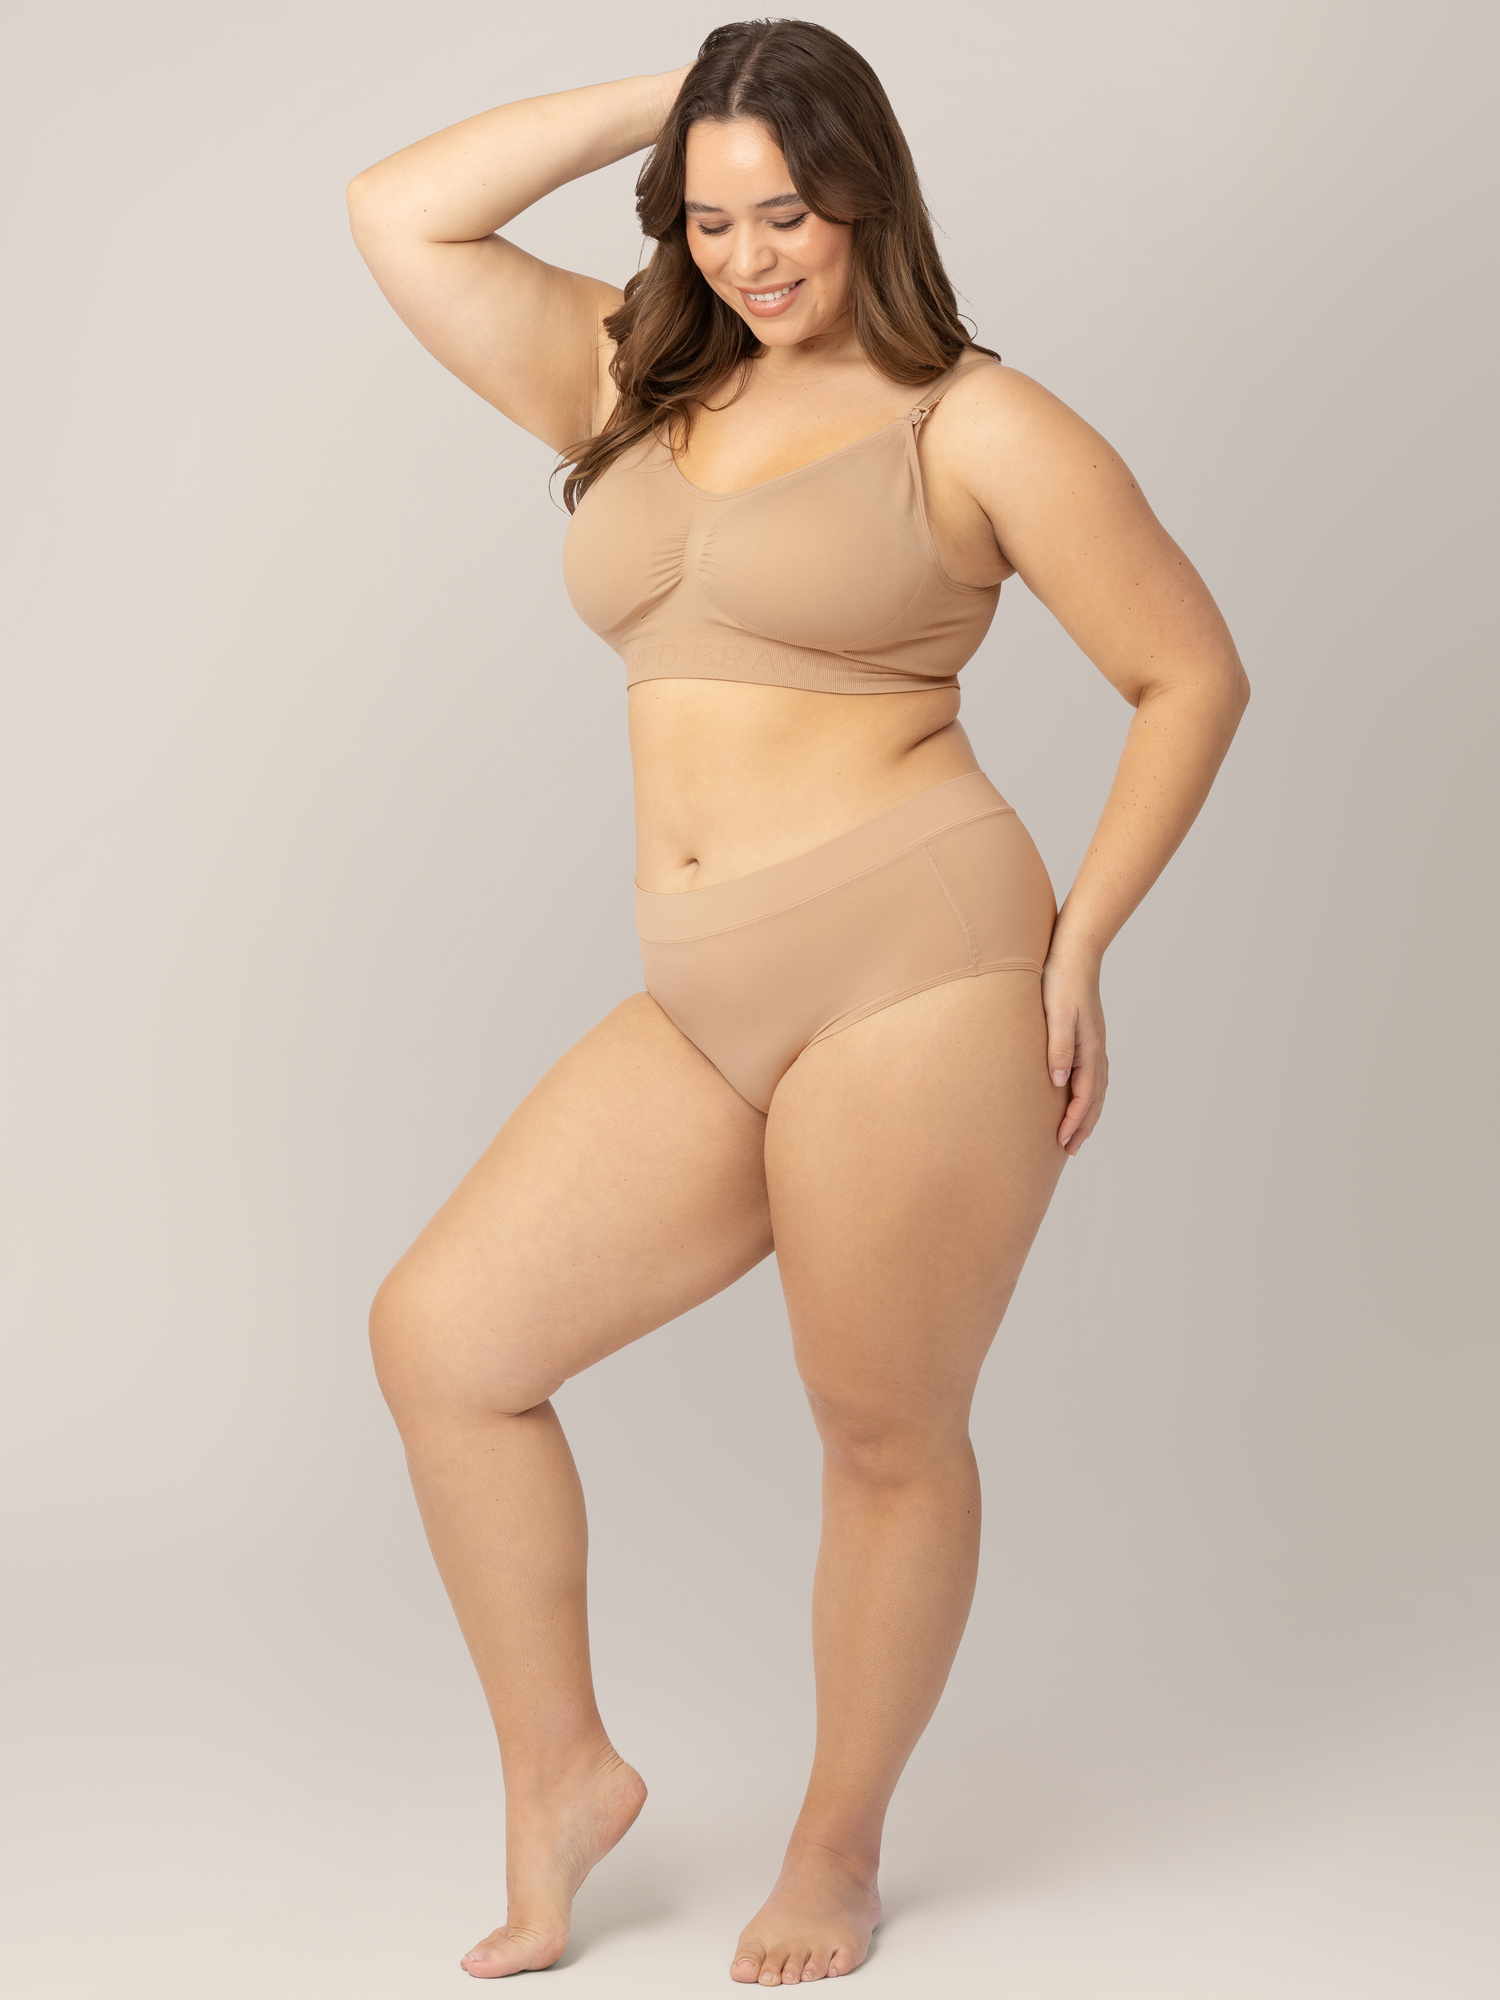 Busty model wearing the Grow with Me™ Maternity & Postpartum Brief in Beige with one hand on her hip and the back of her head.